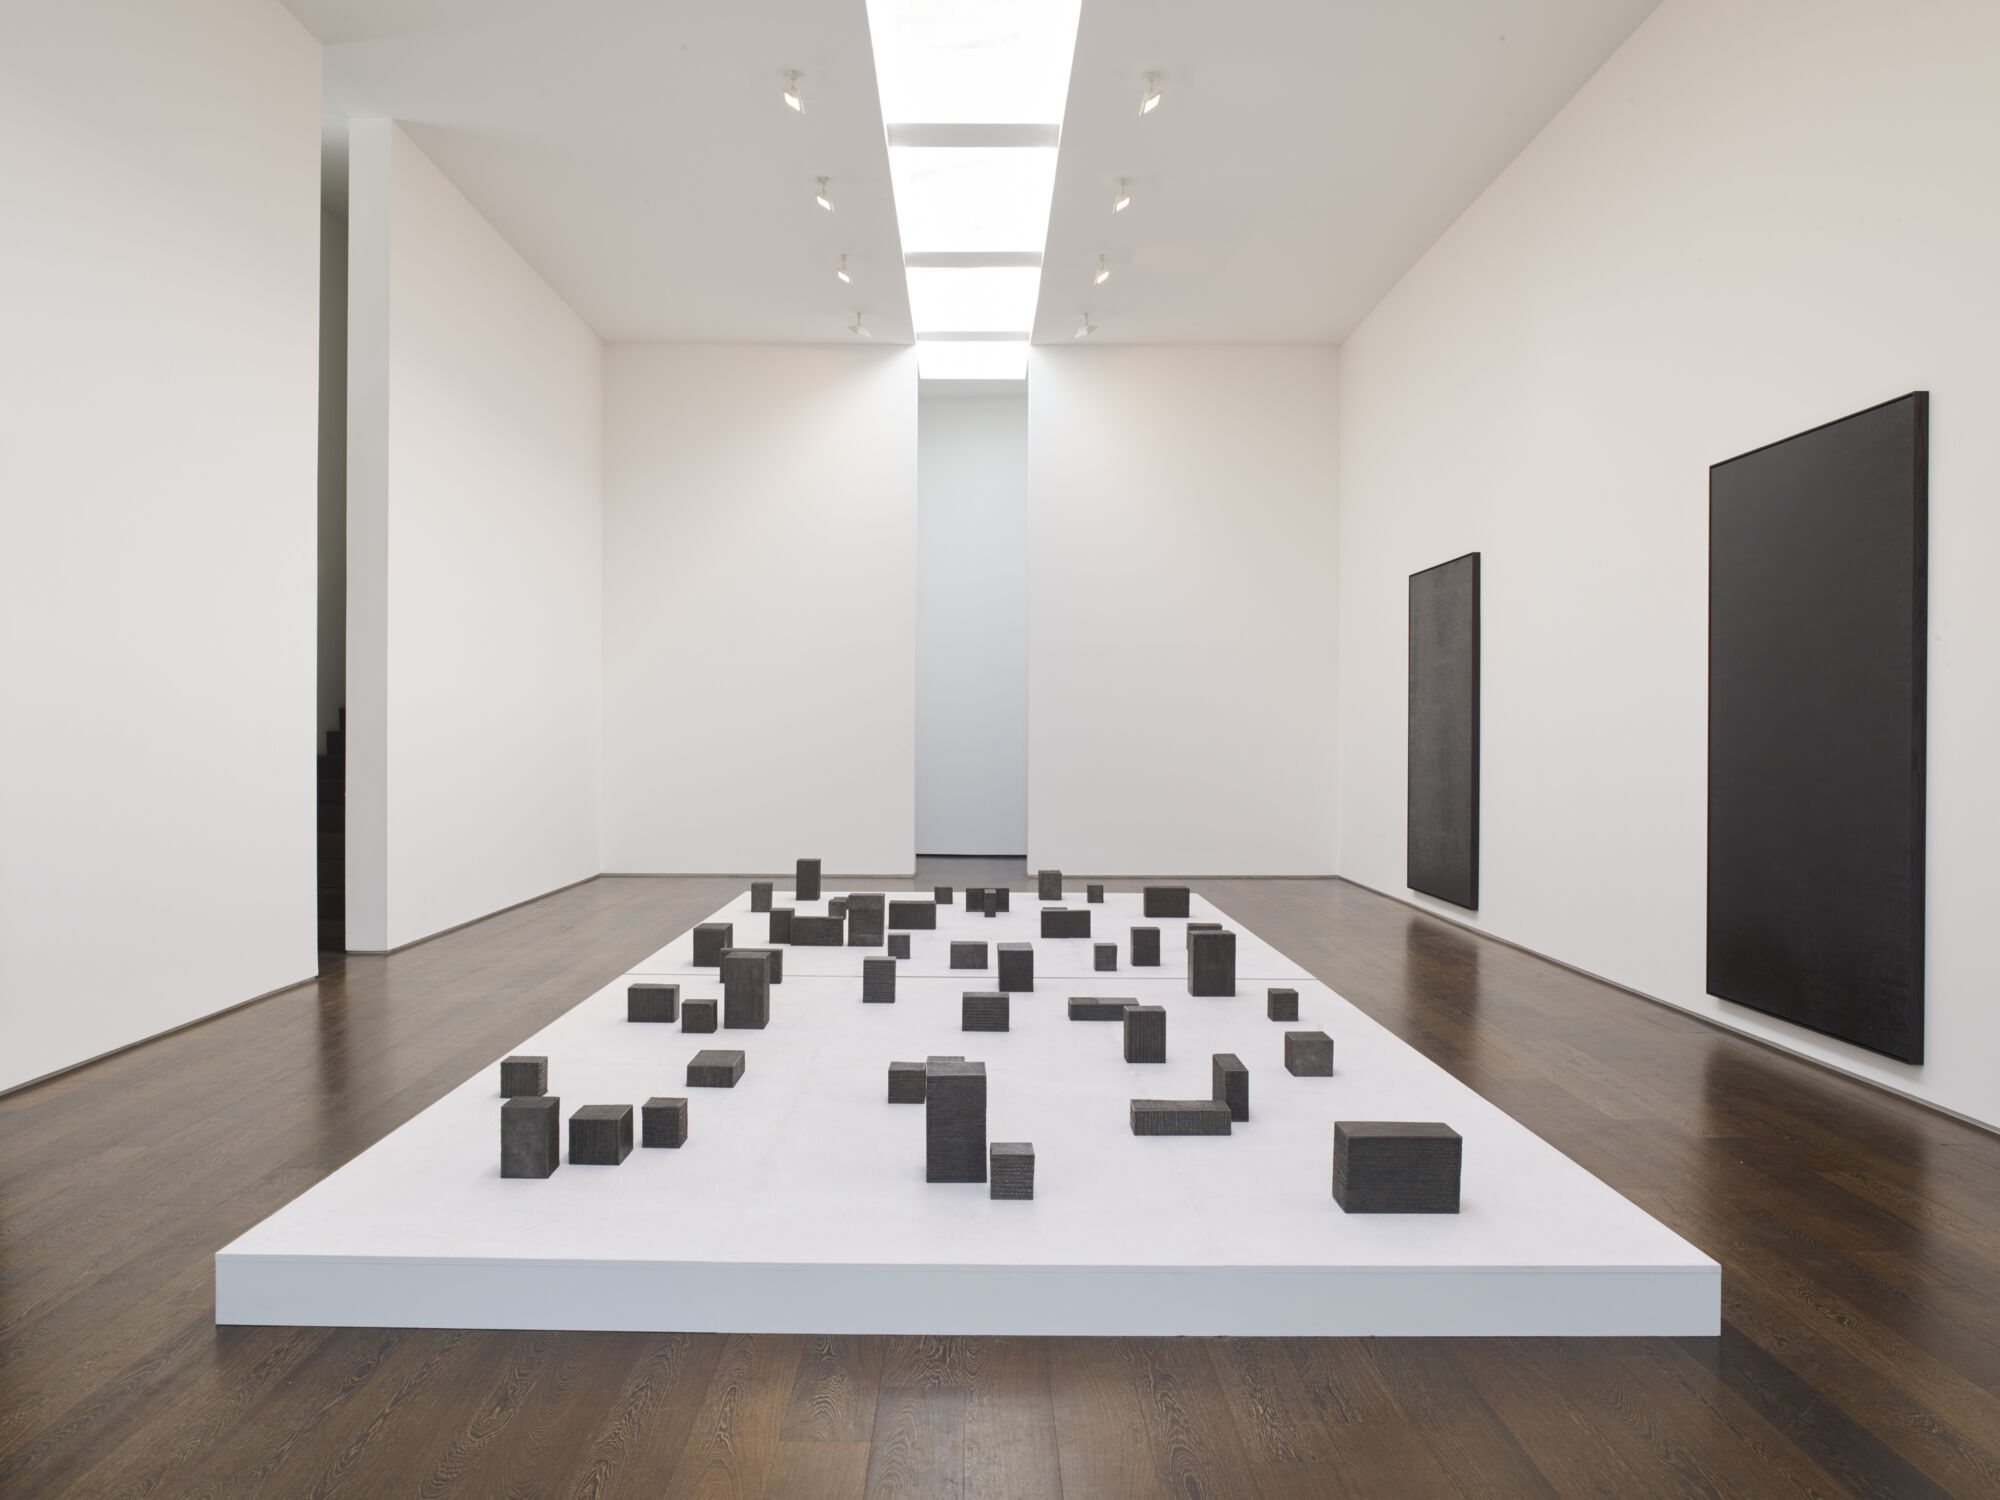 The Wick - Idris Khan, Absorbing Light, 2017 Series of 46 bronze blocks, Courtesy the artist and Victoria Miro, Photographer: Stephen White & Co., Installation view from Victoria Miro Gallery, 2017